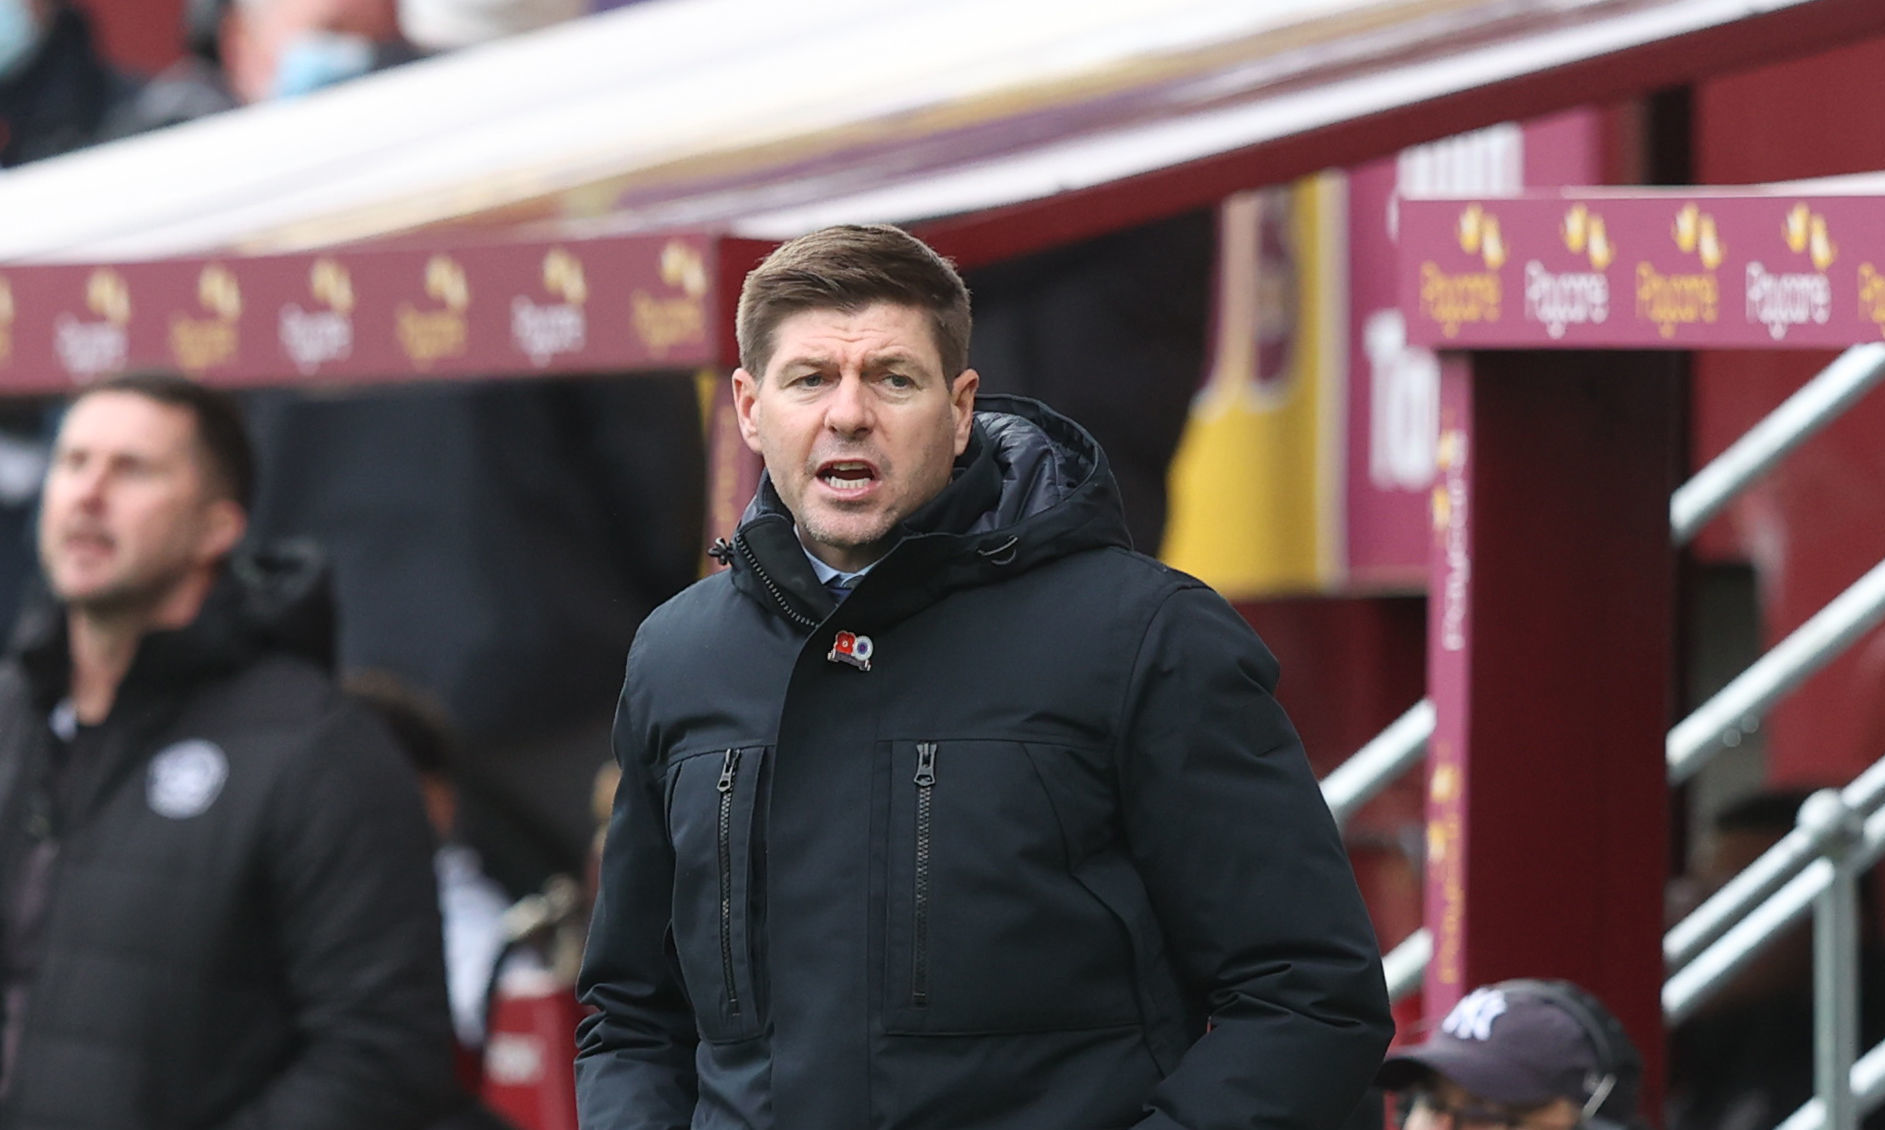 Rangers boss Steven Gerrard makes 'inch away from being perfect' assessment after dominant Motherwell win